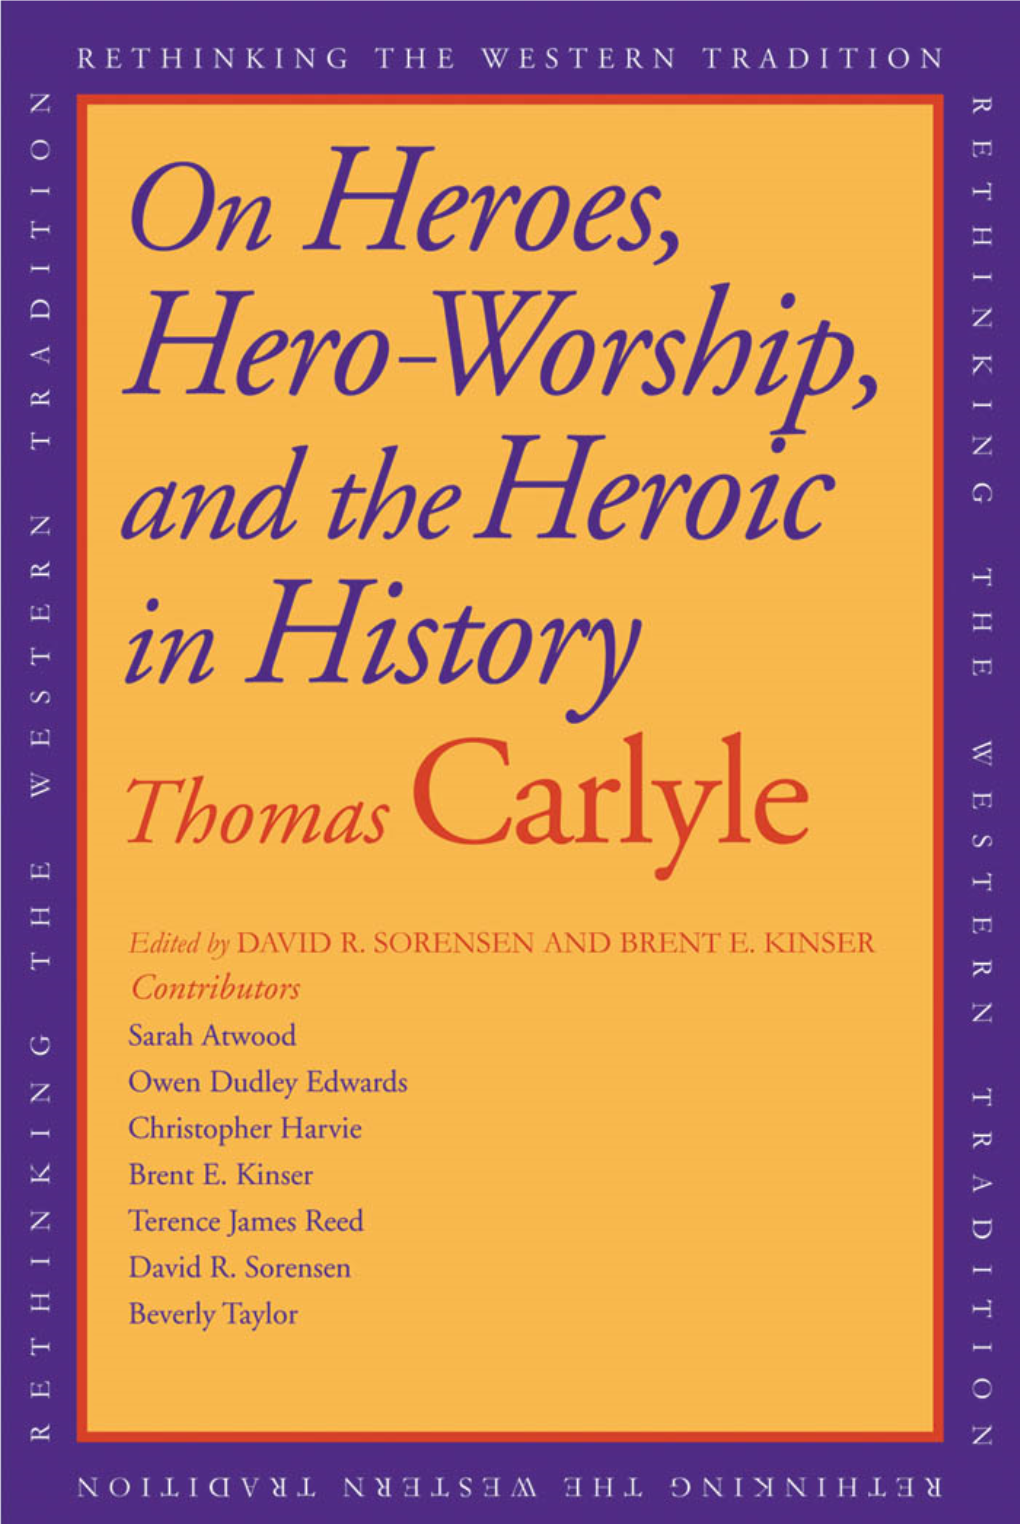 On Heroes, Hero Worship, and the Heroic in History